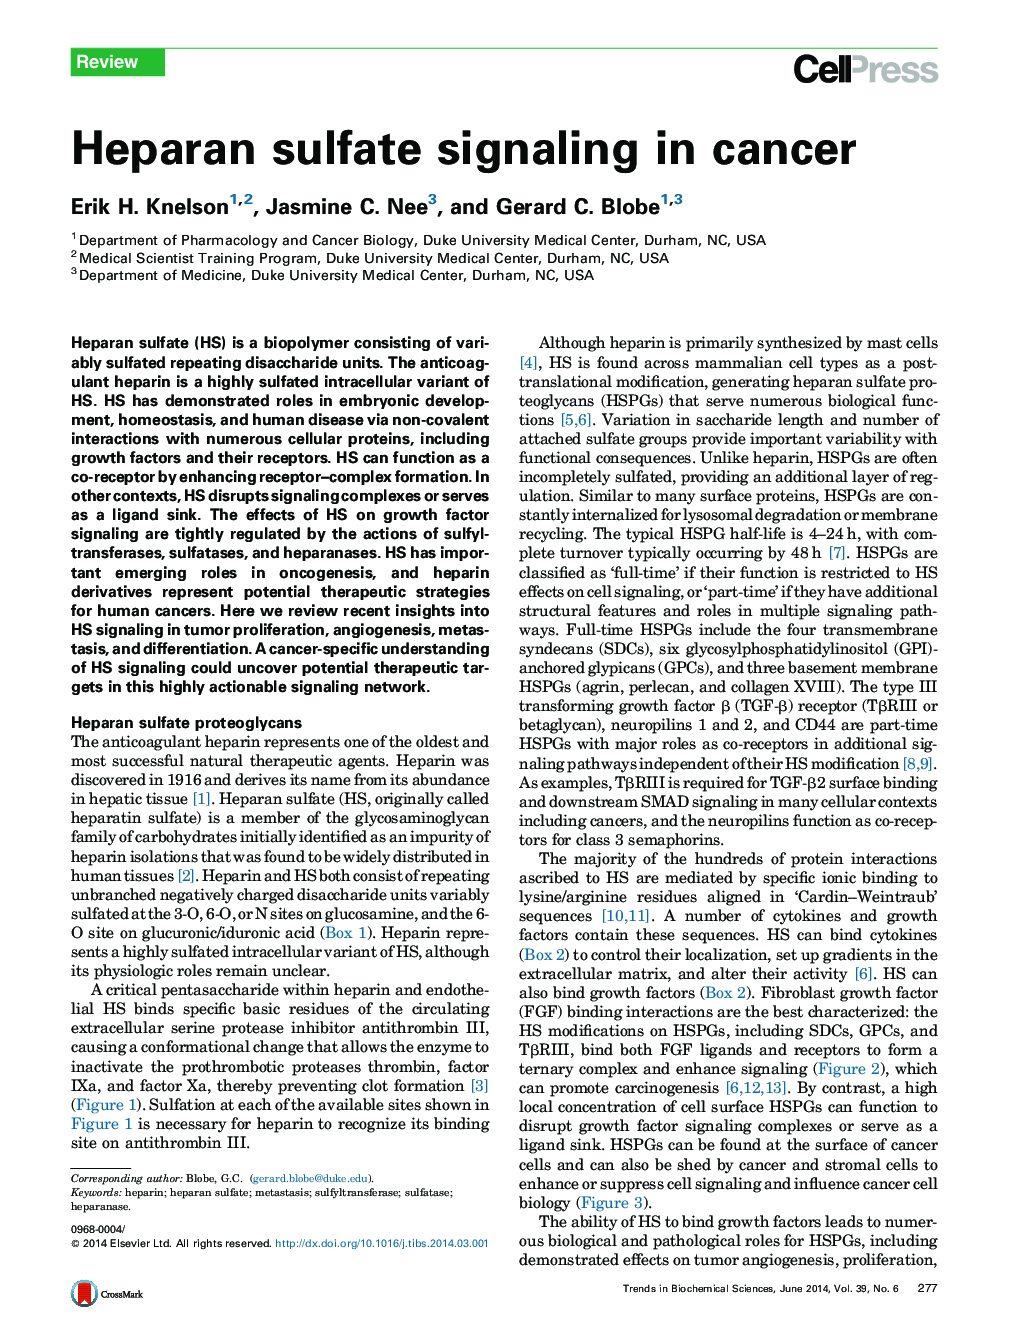 Heparan sulfate signaling in cancer